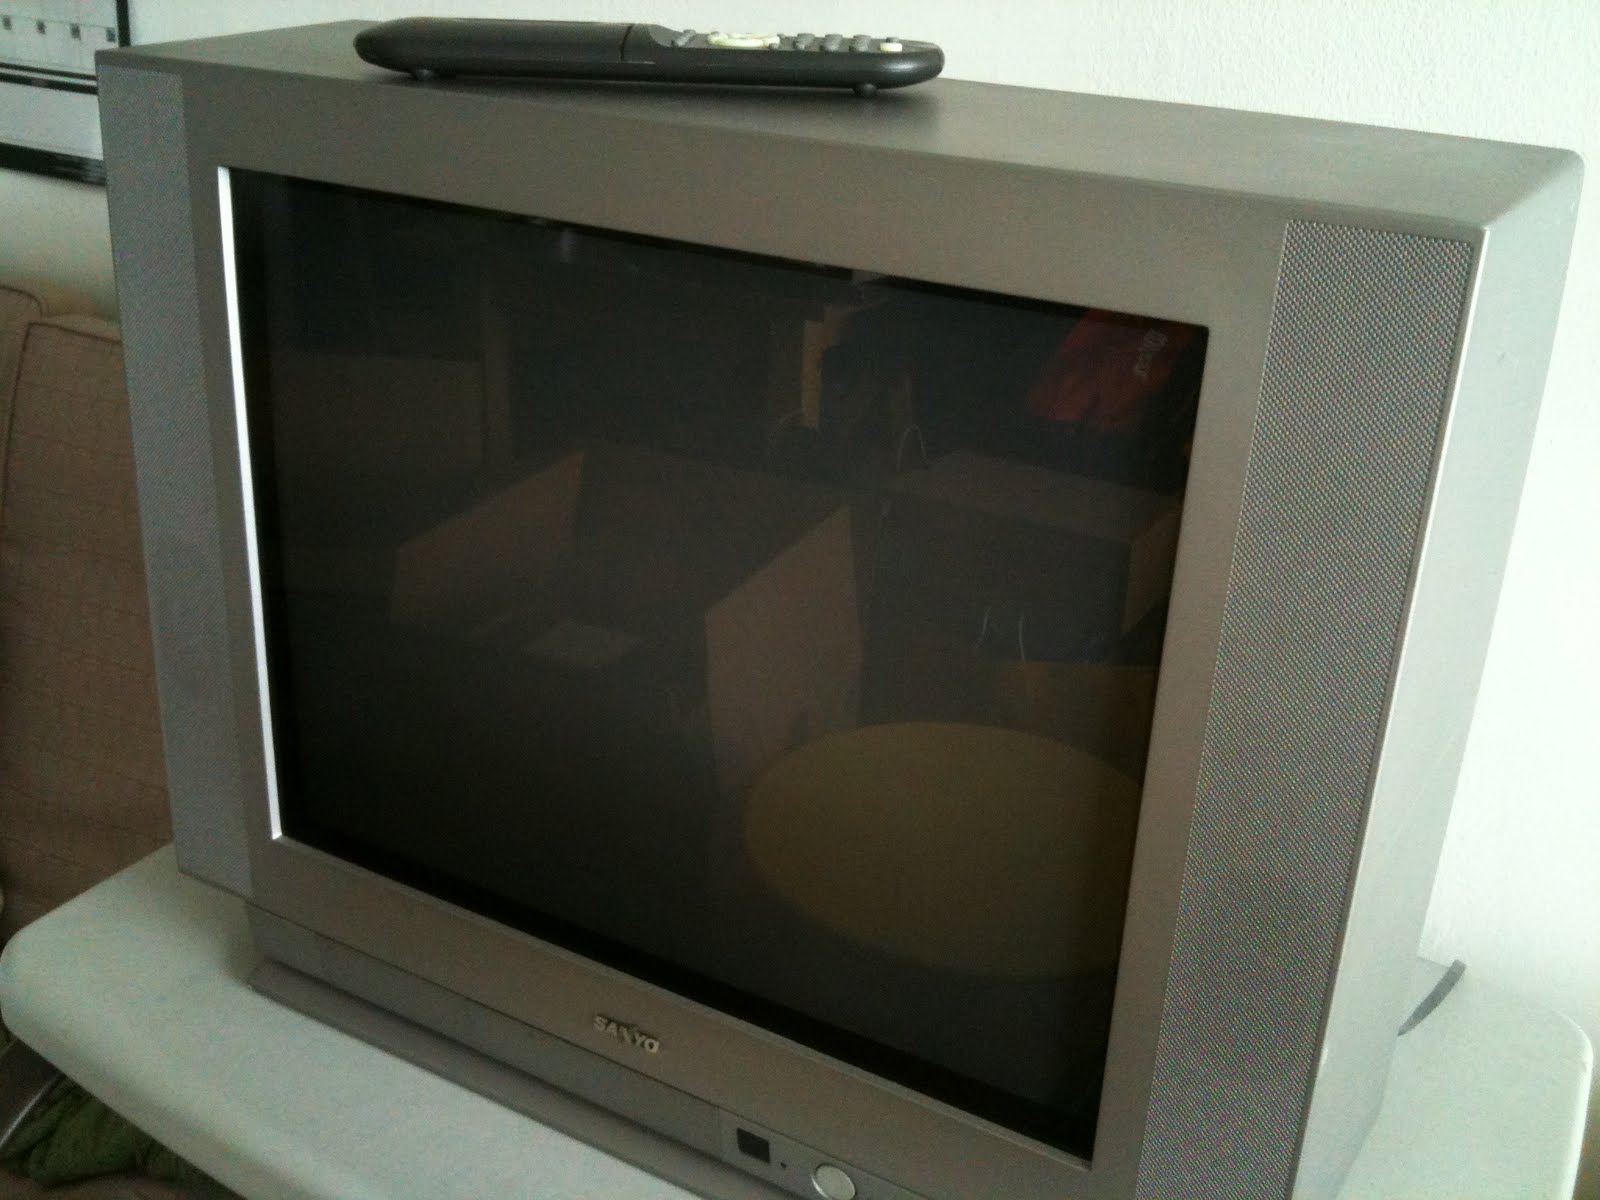 Moving Sale: Sanyo 22' Flat Screen TV w/ remote control $25 and